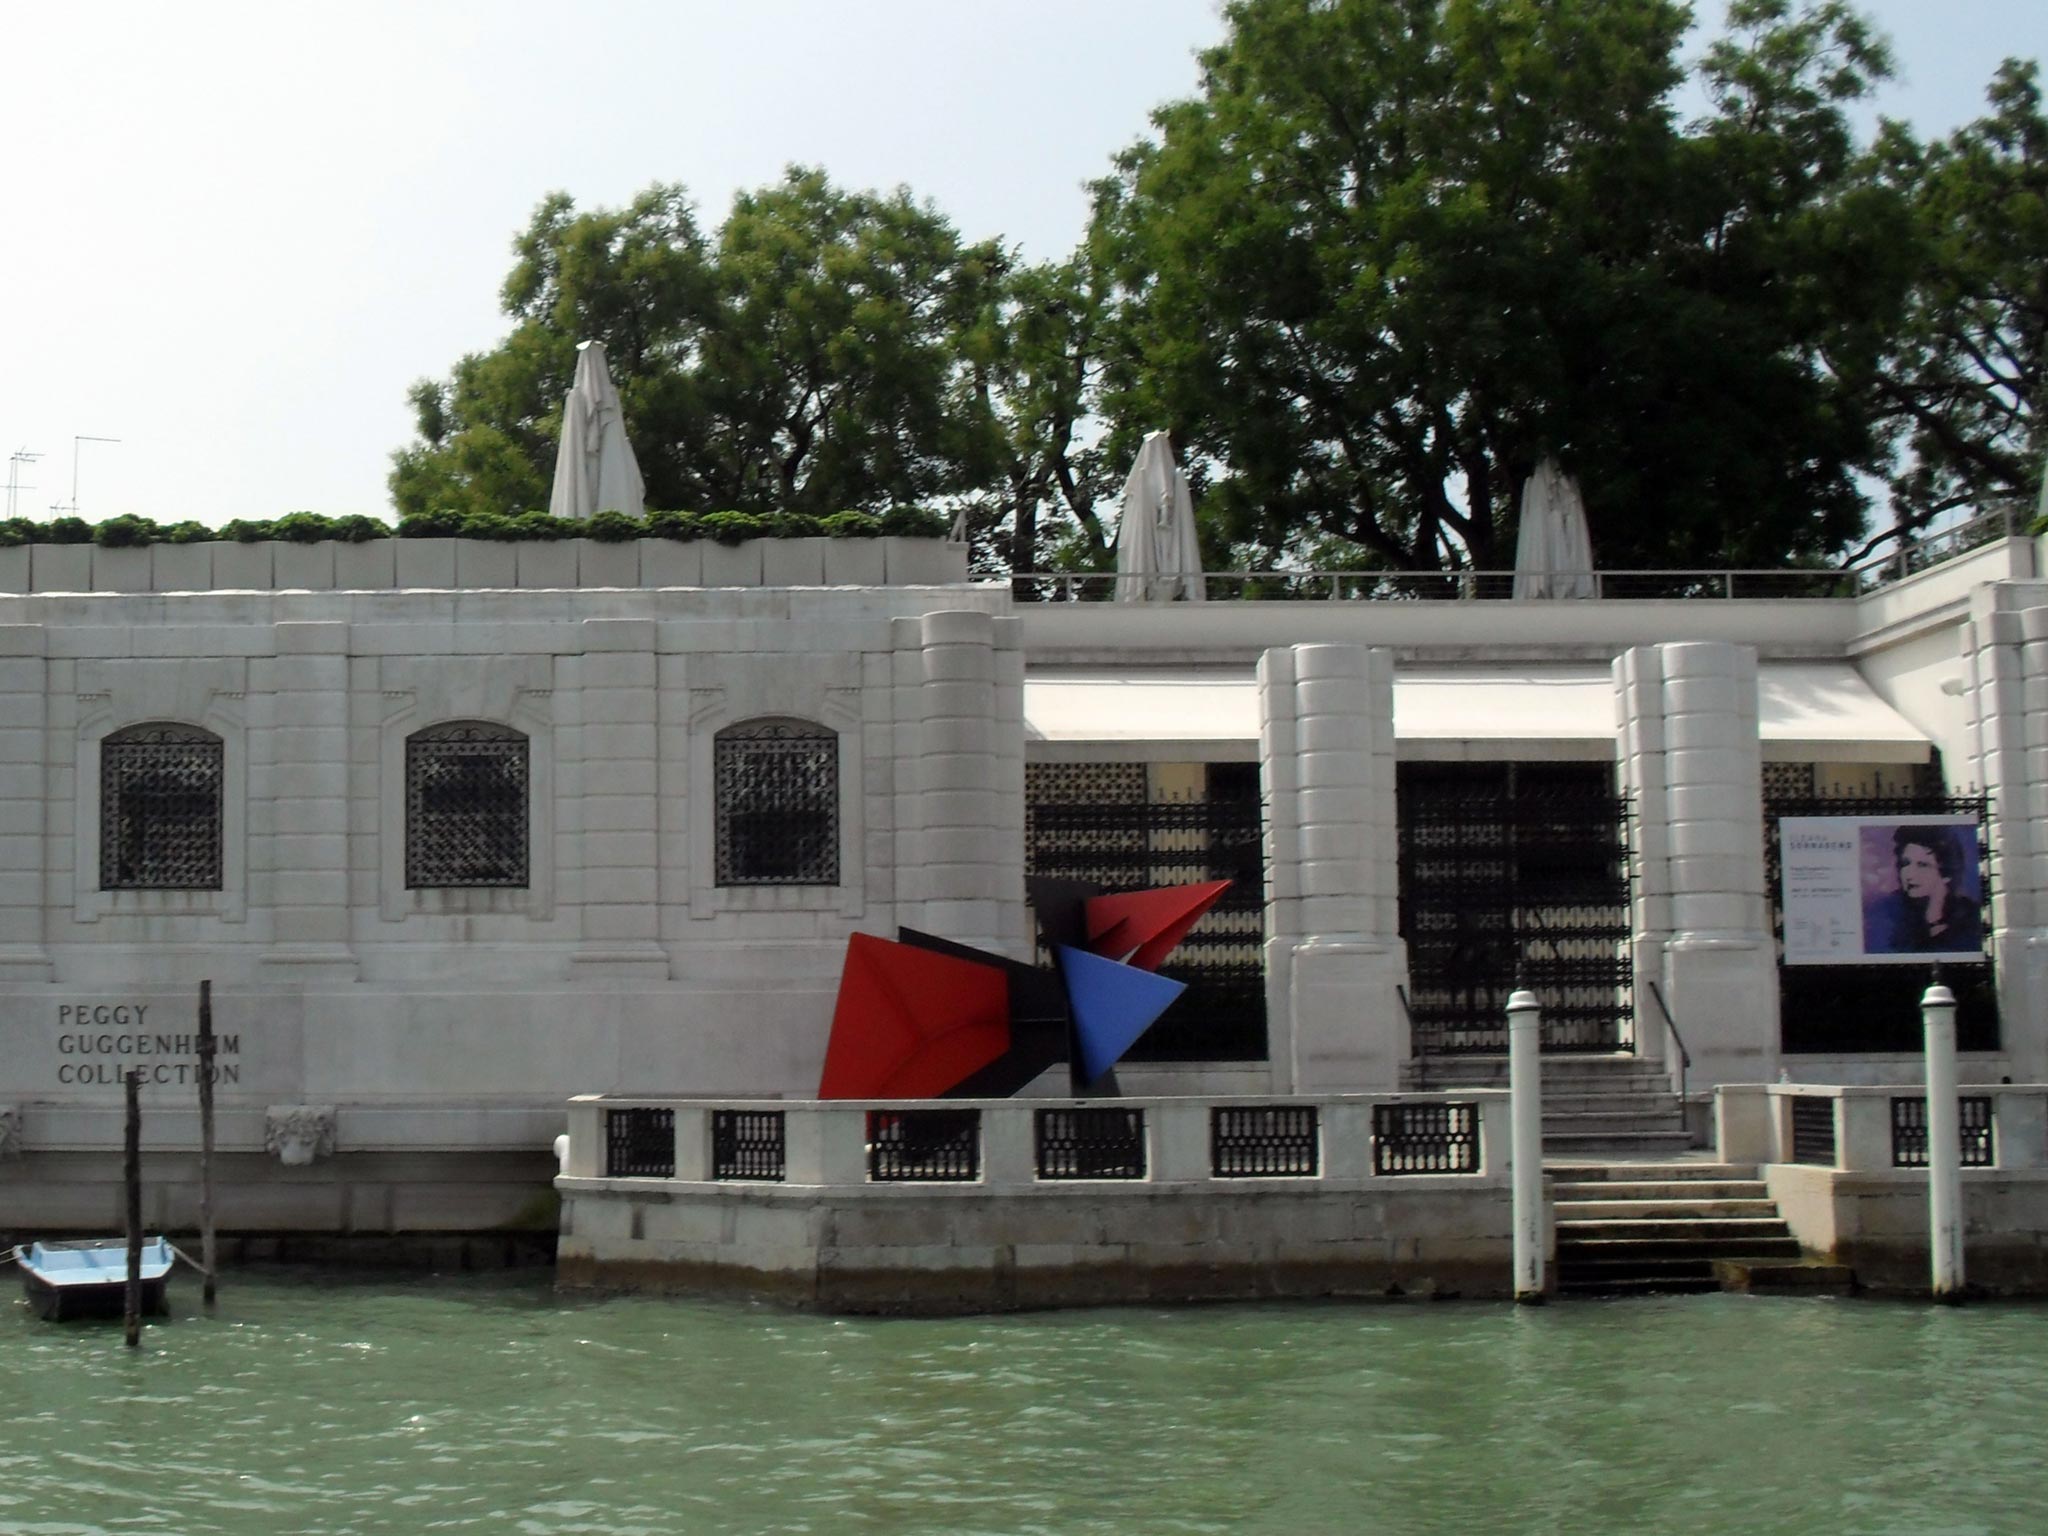 Peggy Guggenheim’s collection in Venice is owned by the New York Guggenheim Foundation